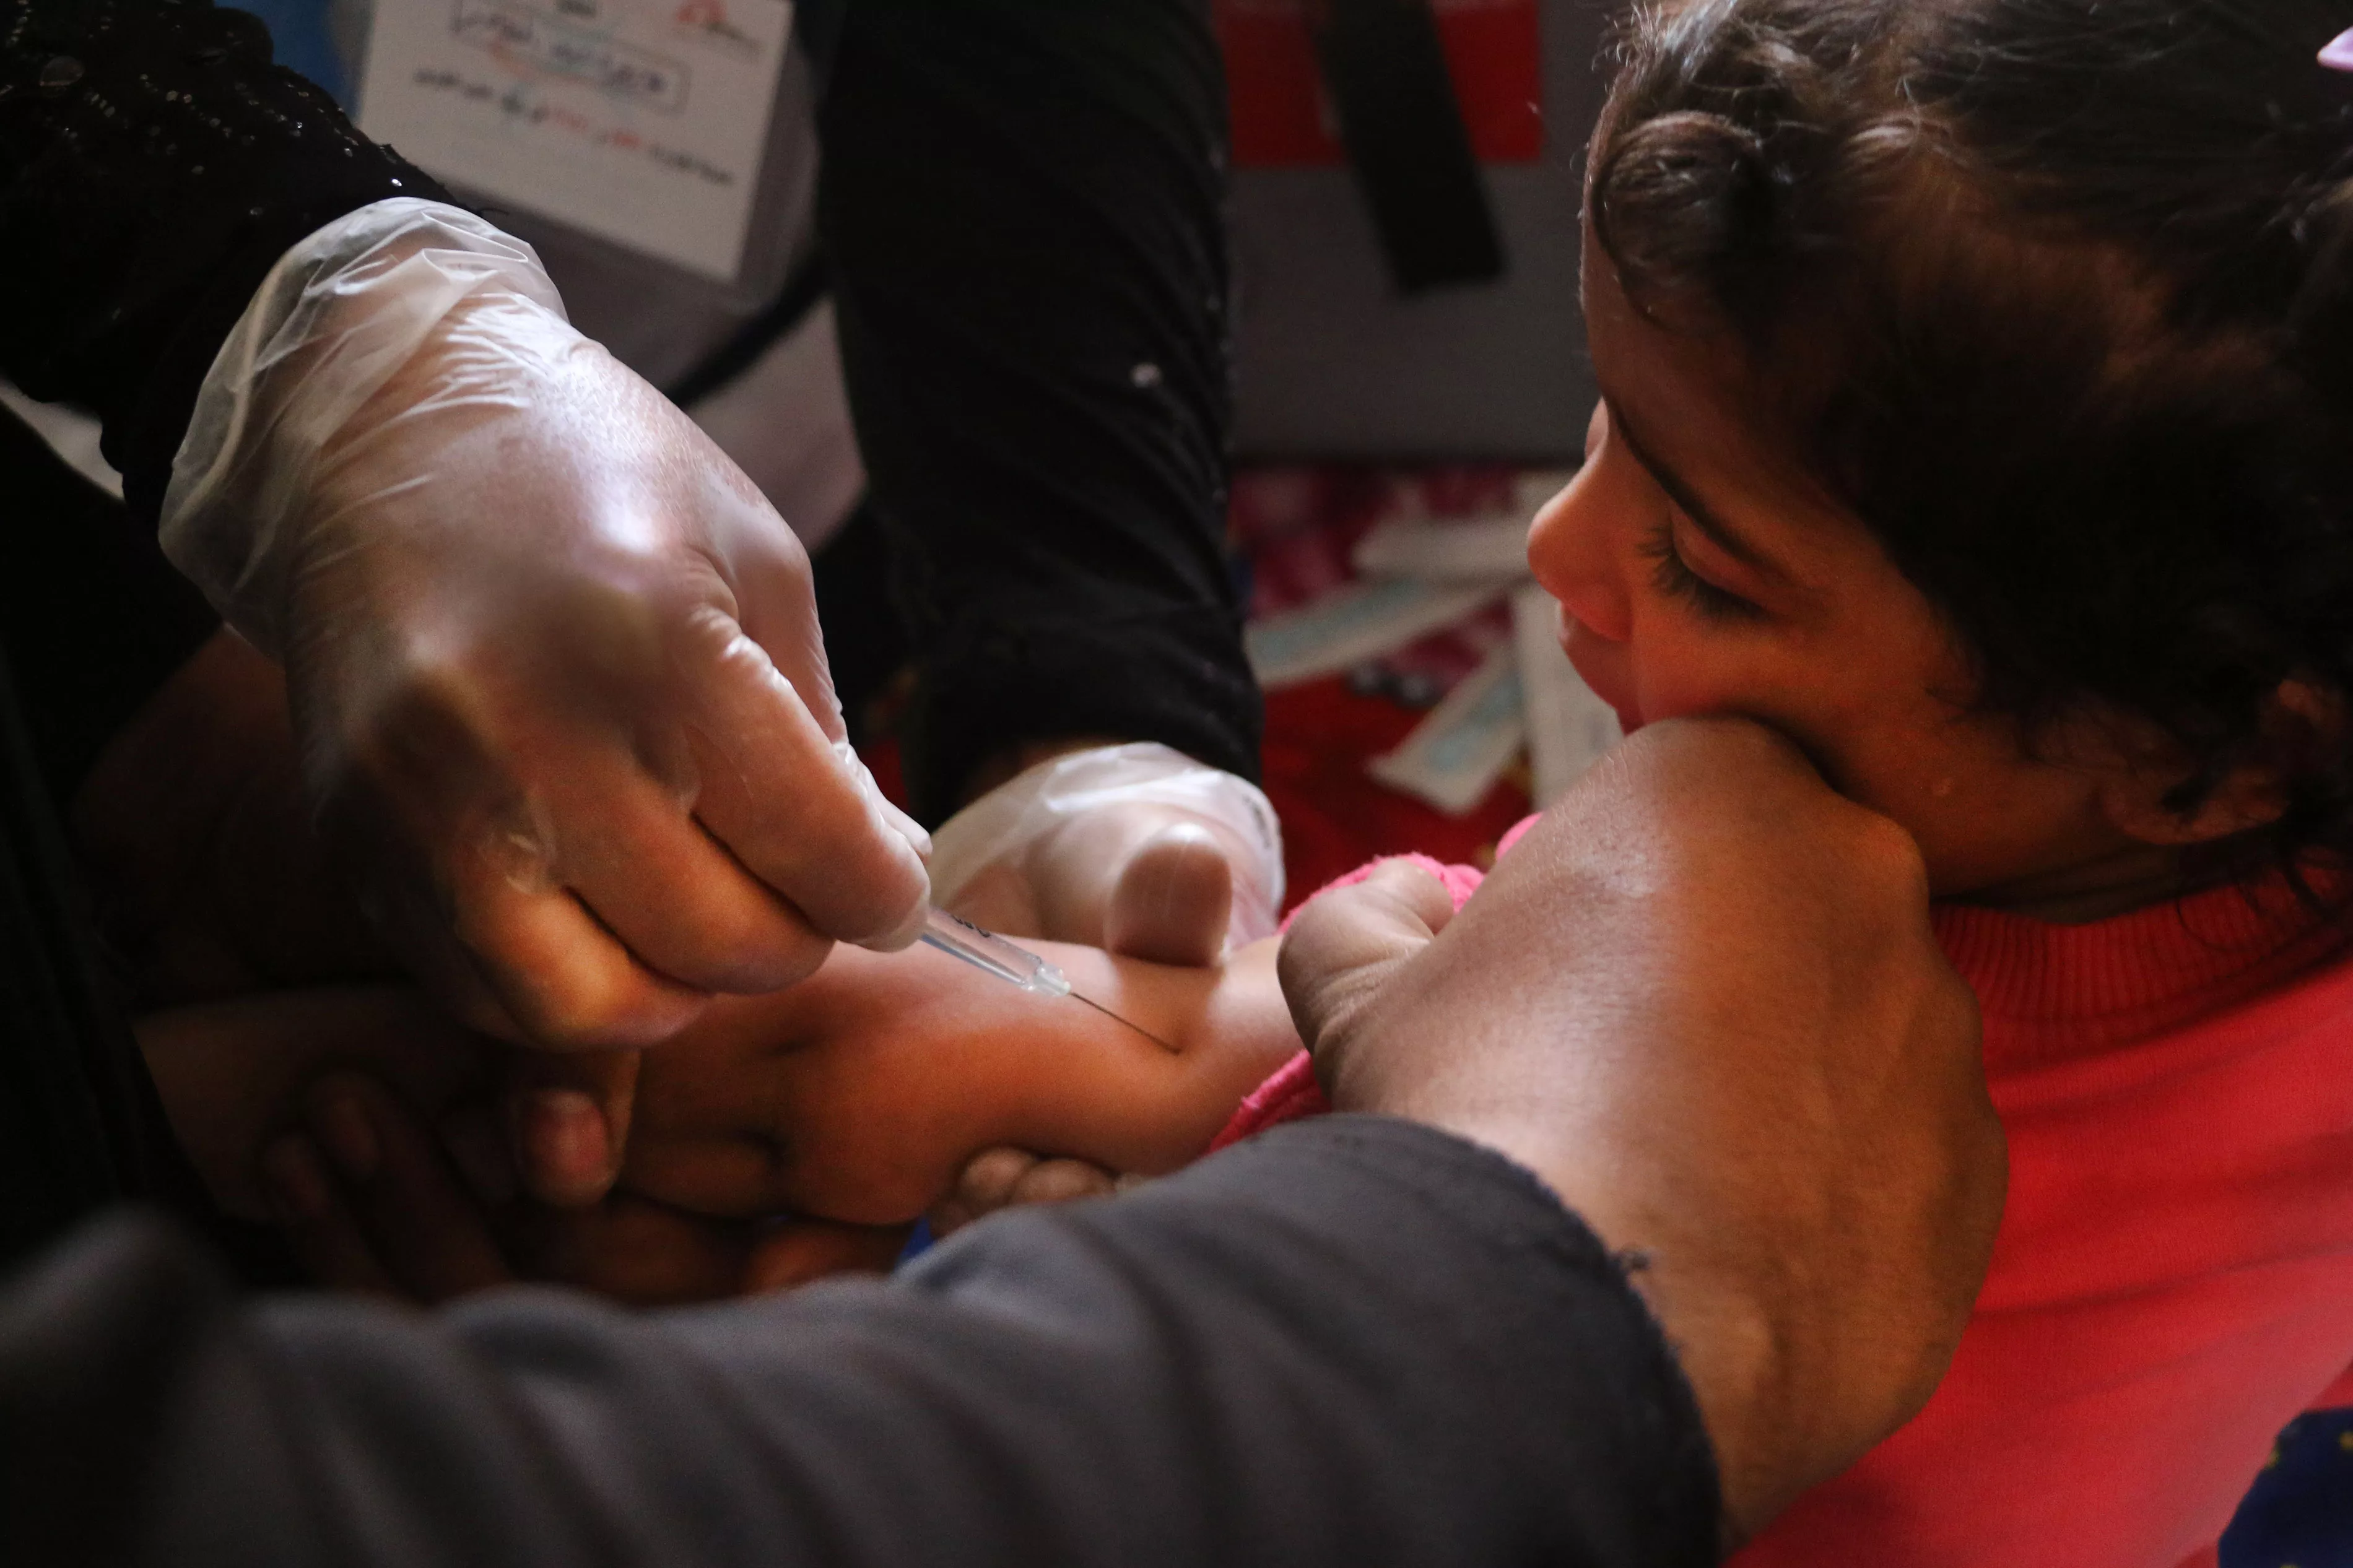 A nurse vaccinates a young Syrian girl against measles and pneumonia in Al-Atareb, Syria. MSF conducted a vaccination campaign targeting tens of thousands of children in partnership with the Syrian Immunization Group and Health Directorate of Aleppo, Syria. -Al-Atareb-14-4-2018 Roaa Hasan.